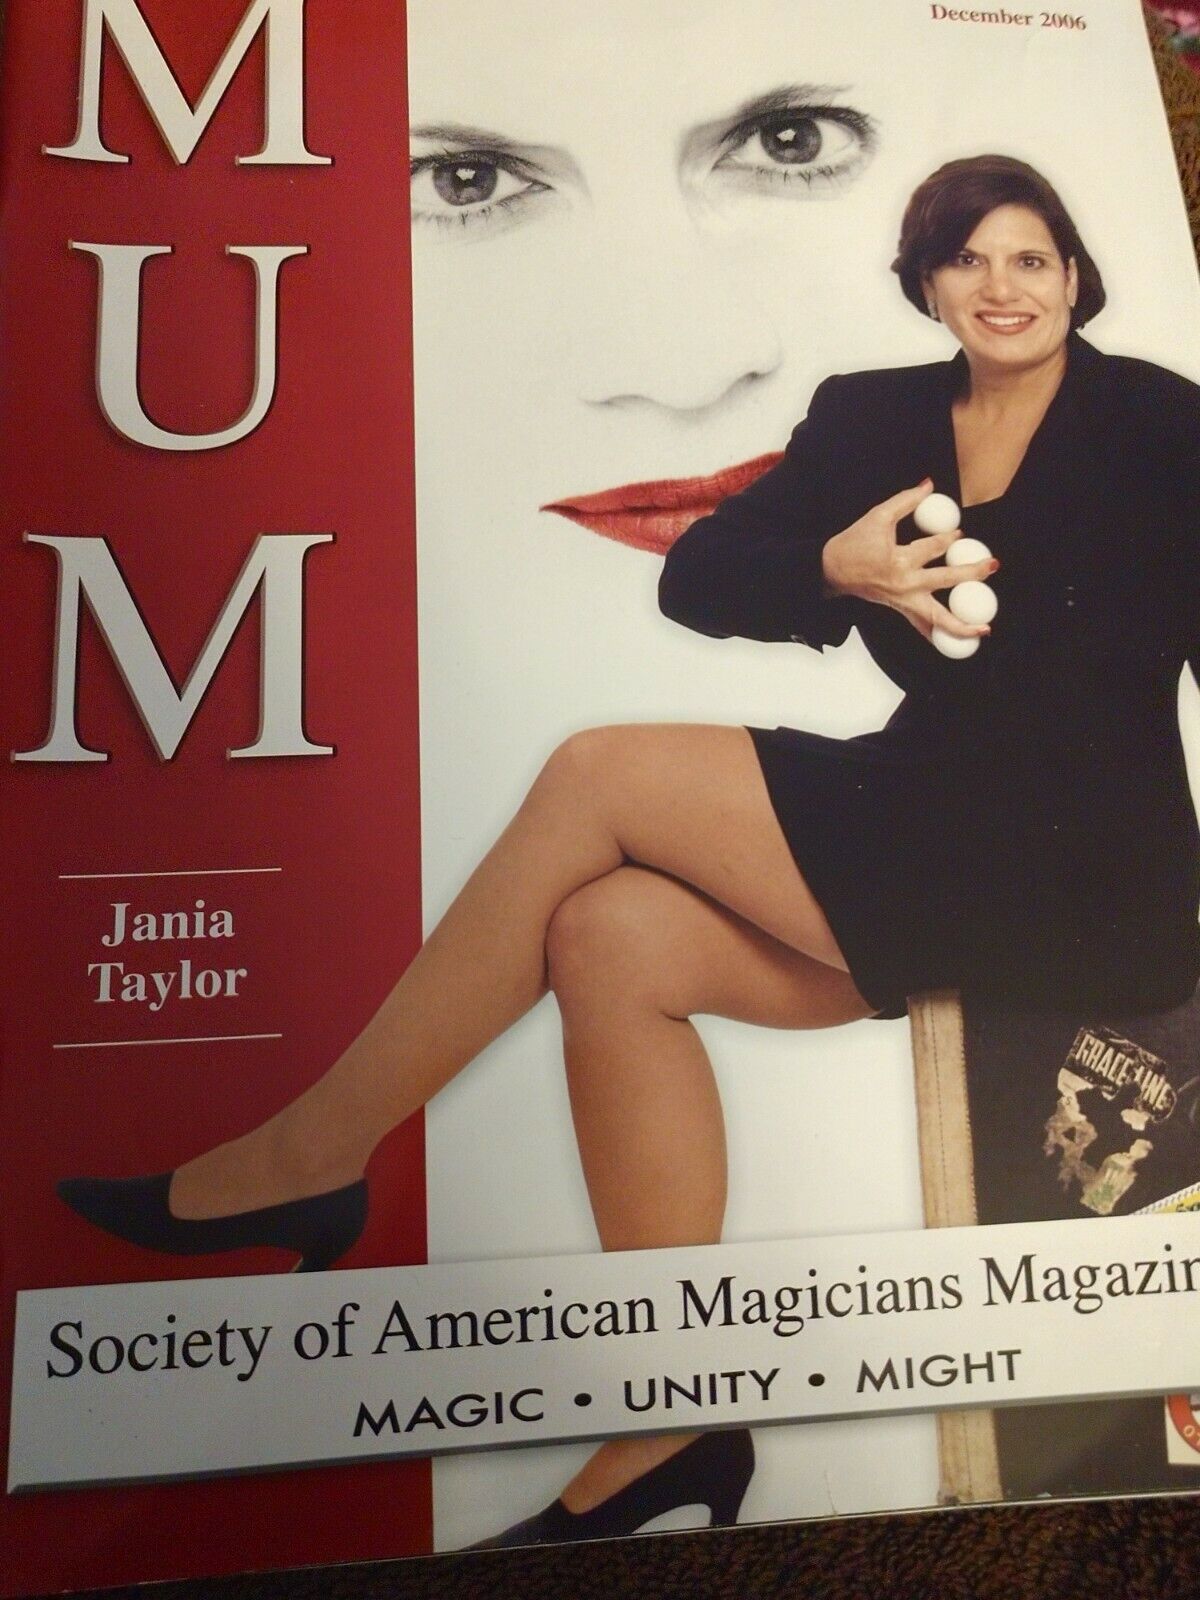 Women in Magic Jania Taylor MUM Issue 2006 George Schindler Reports